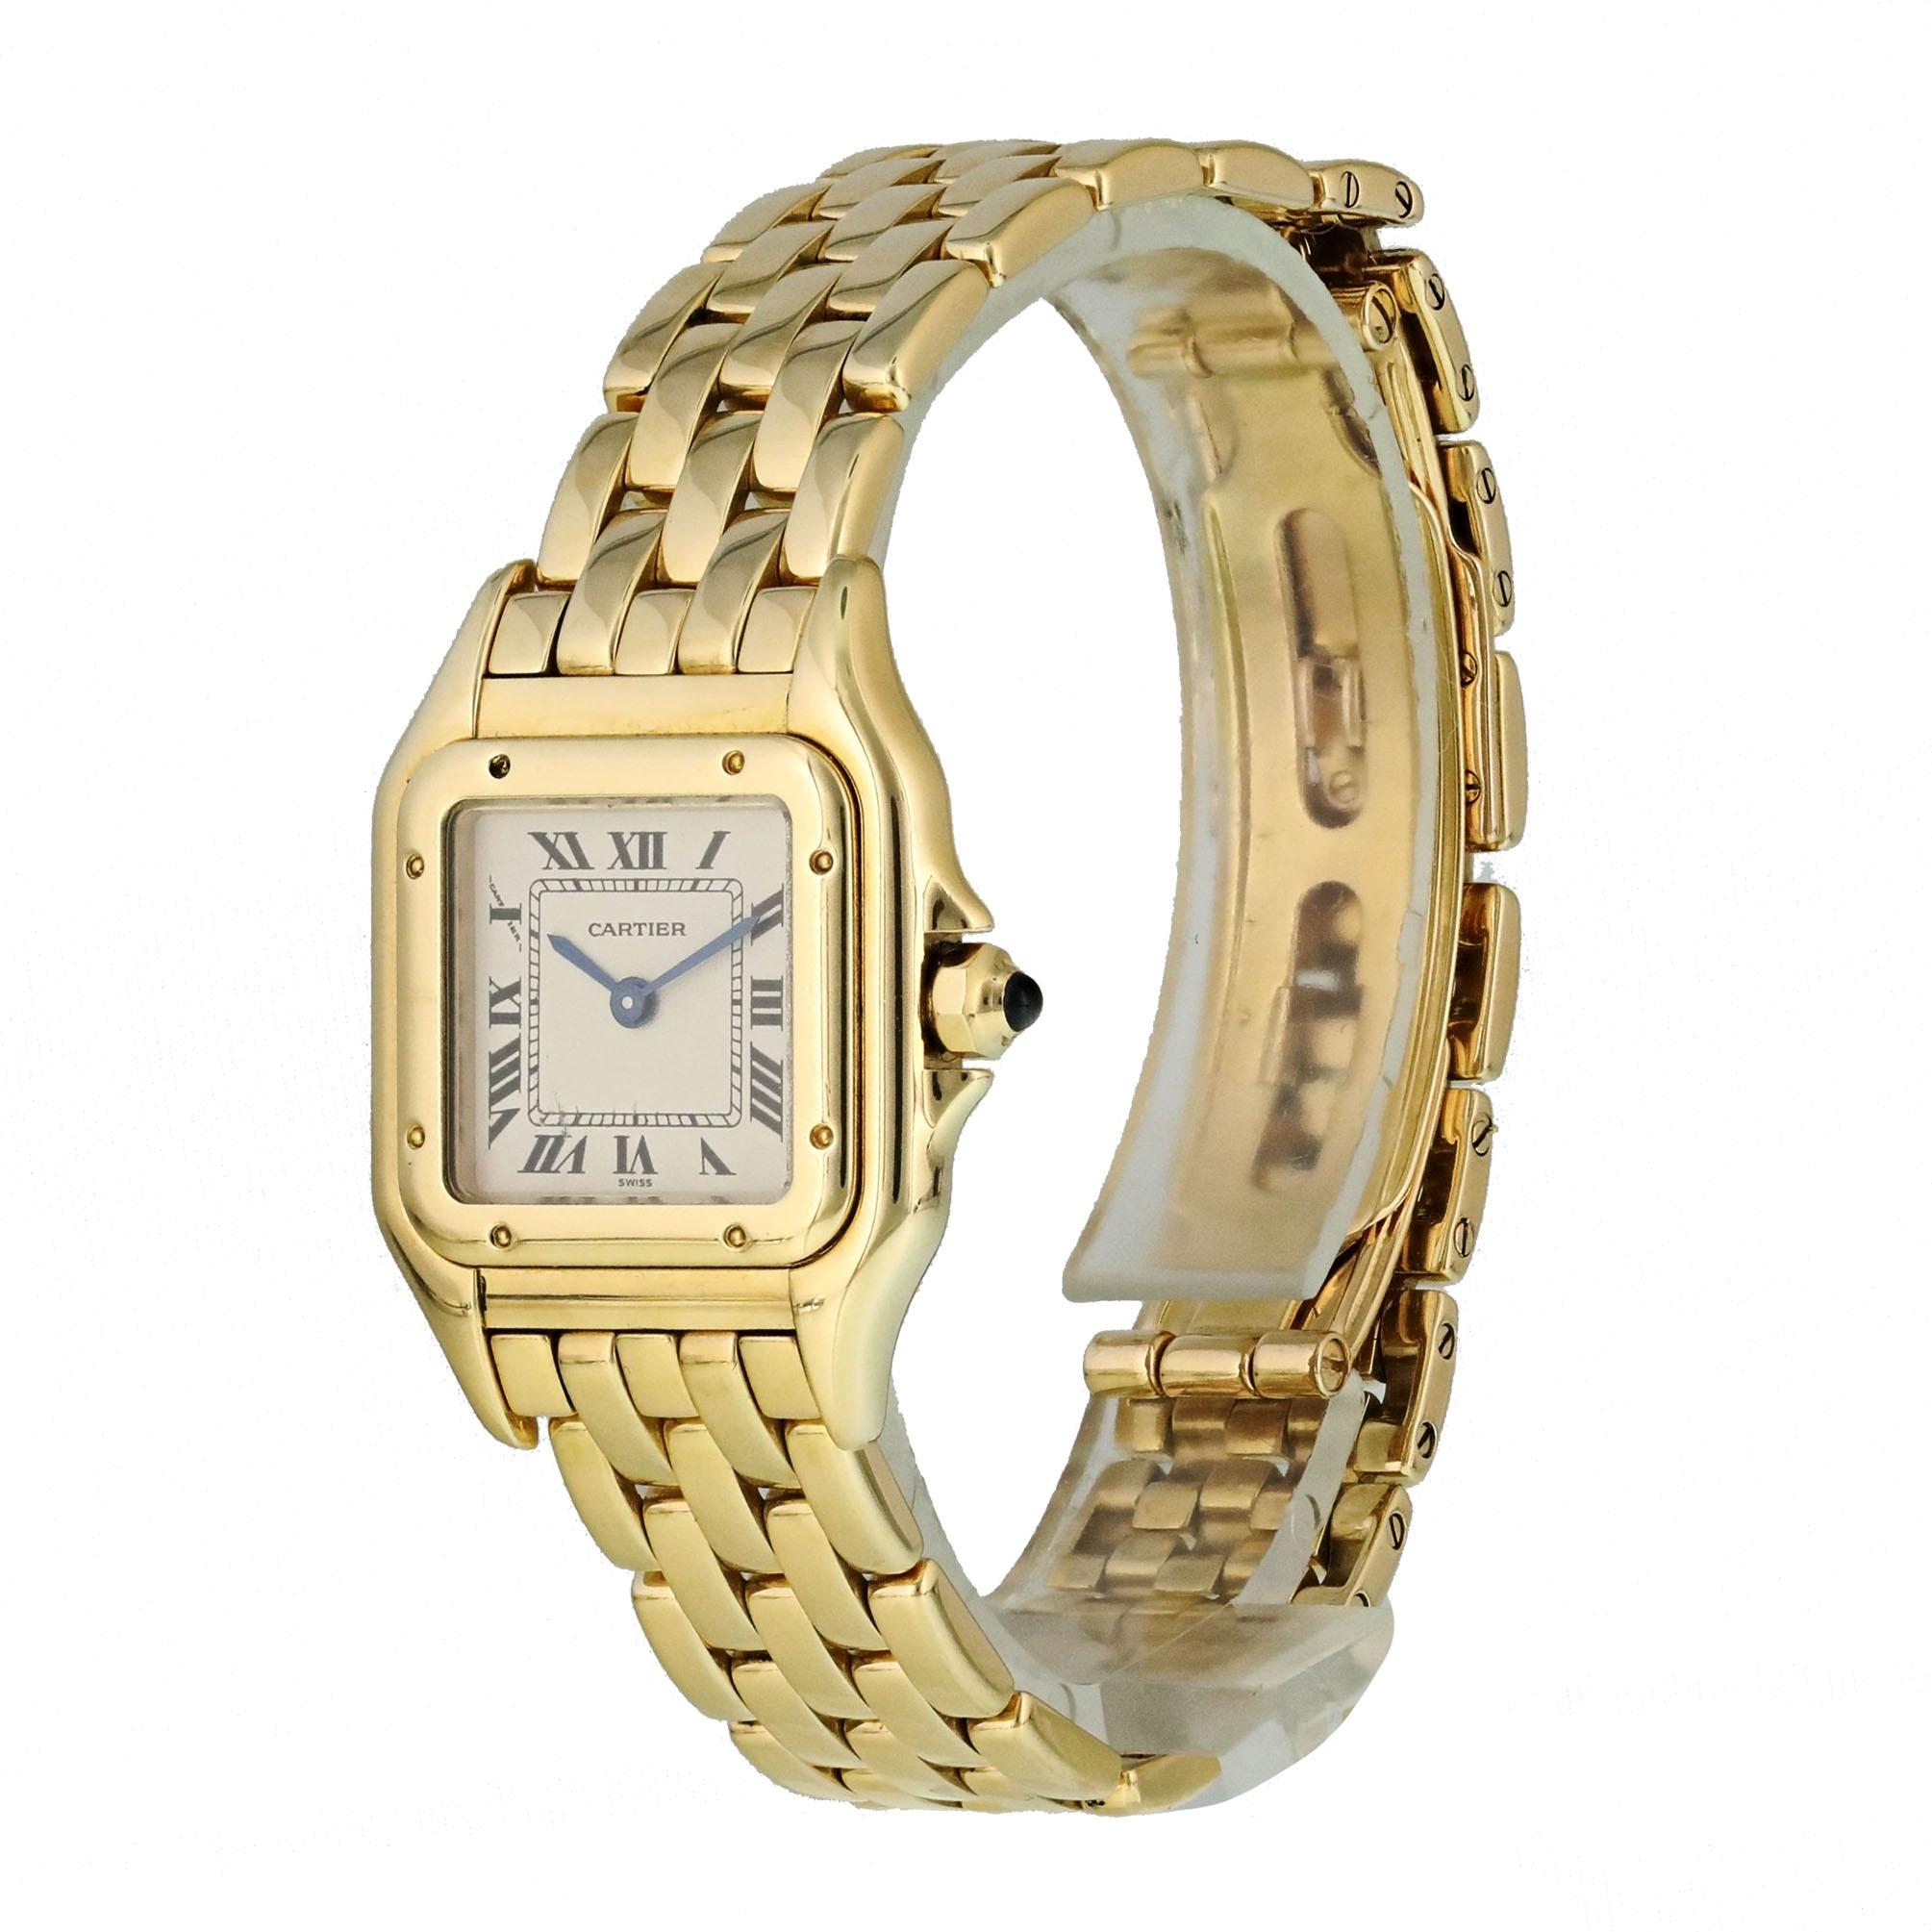 Cartier Panthere 8057917 Yellow Gold Ladies Watch. 
22mm 18k Yellow gold case. 
Yellow Gold Stationary bezel. 
Off-White dial with Blue steel hands and index hour markers. 
Minute markers on the inner dial. 
Yellow Gold Bracelet with butterfly